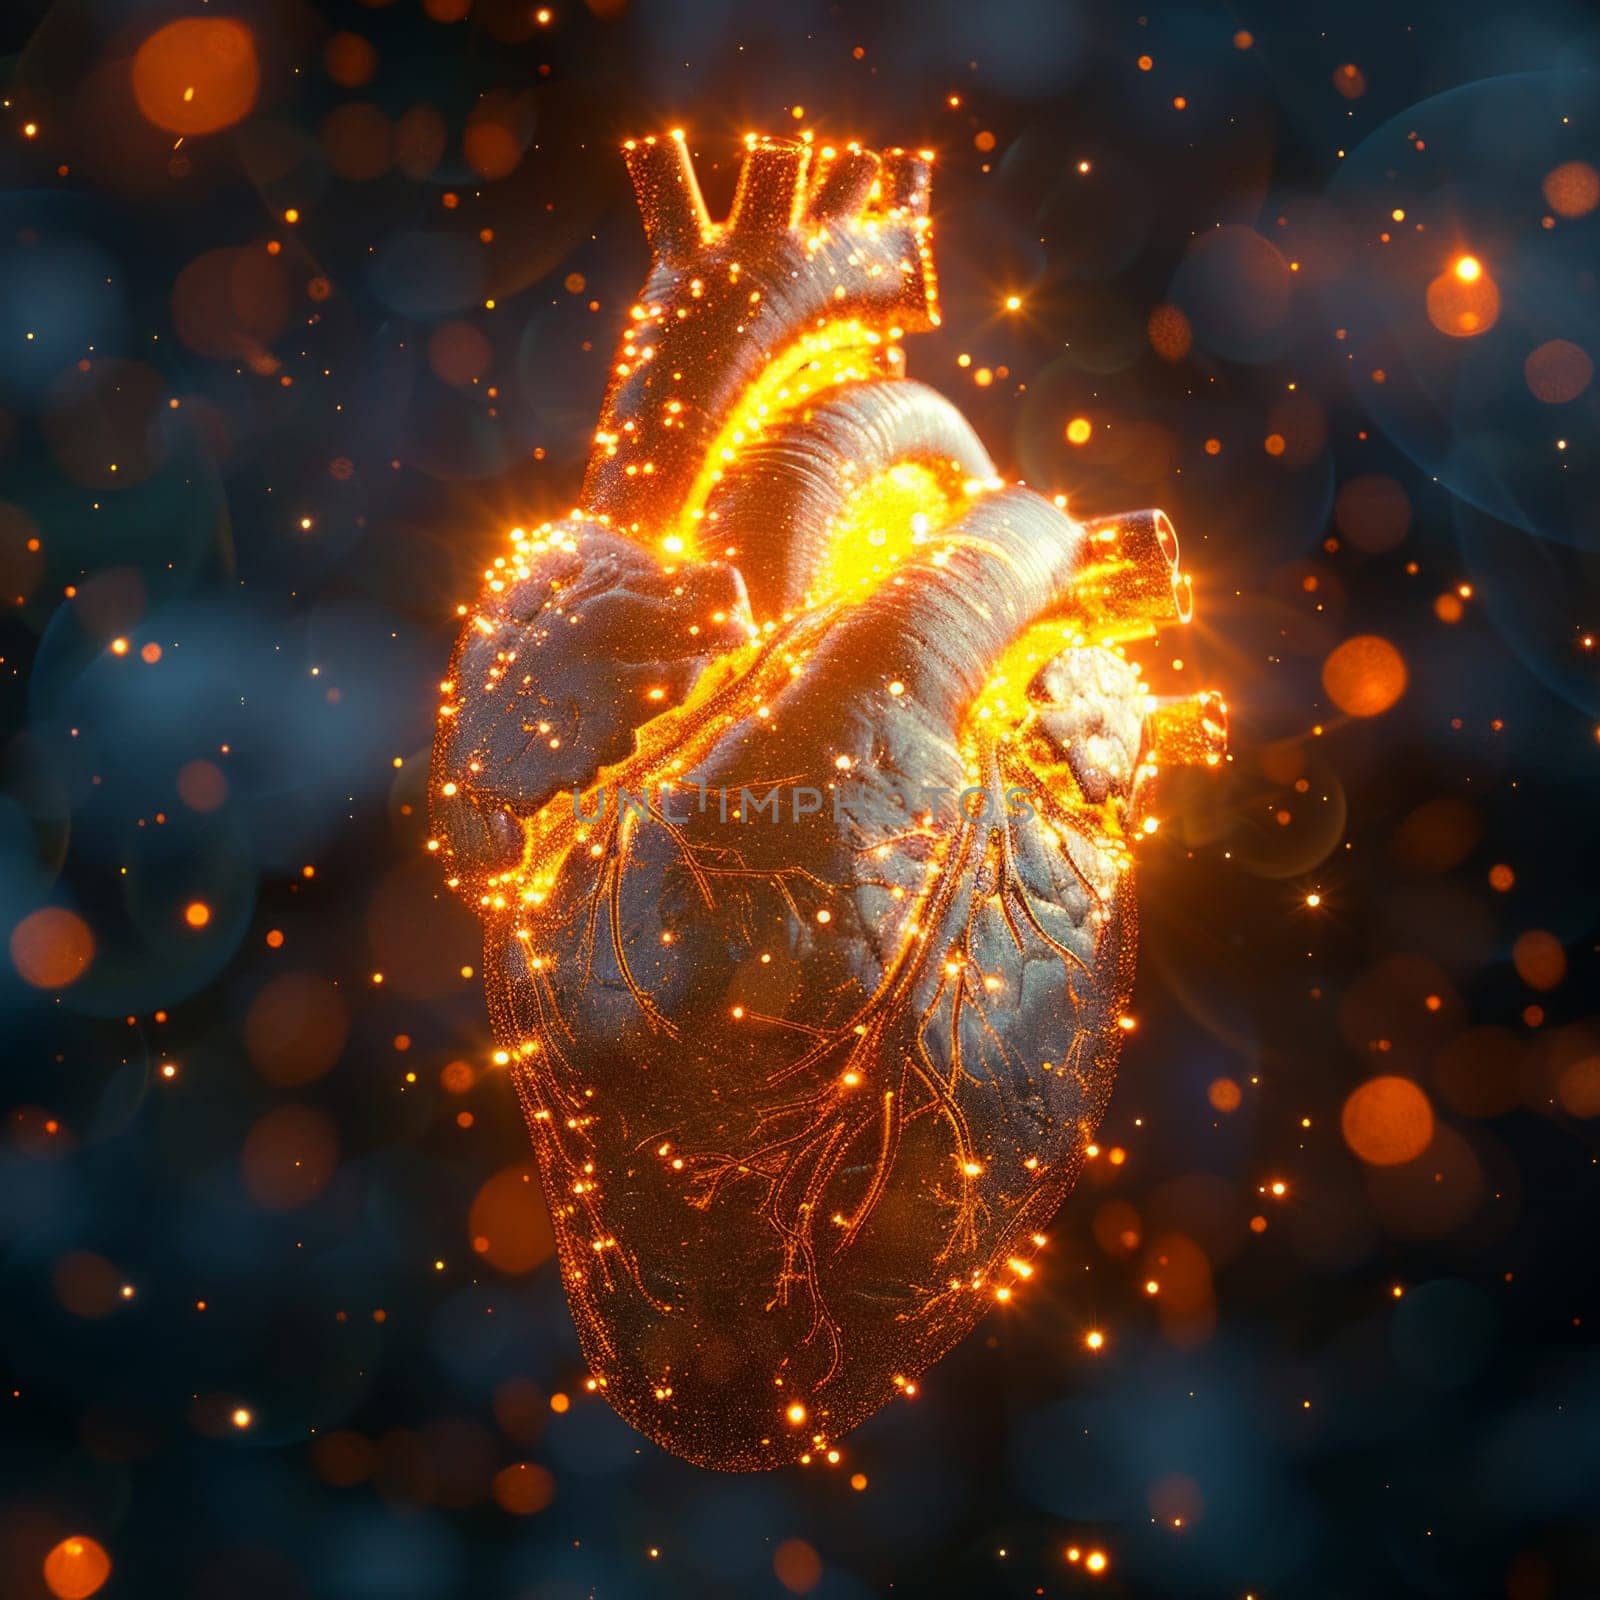 A mesmerizing computer-generated portrayal of a human heart, pulsating in radiant hues and intricate details.